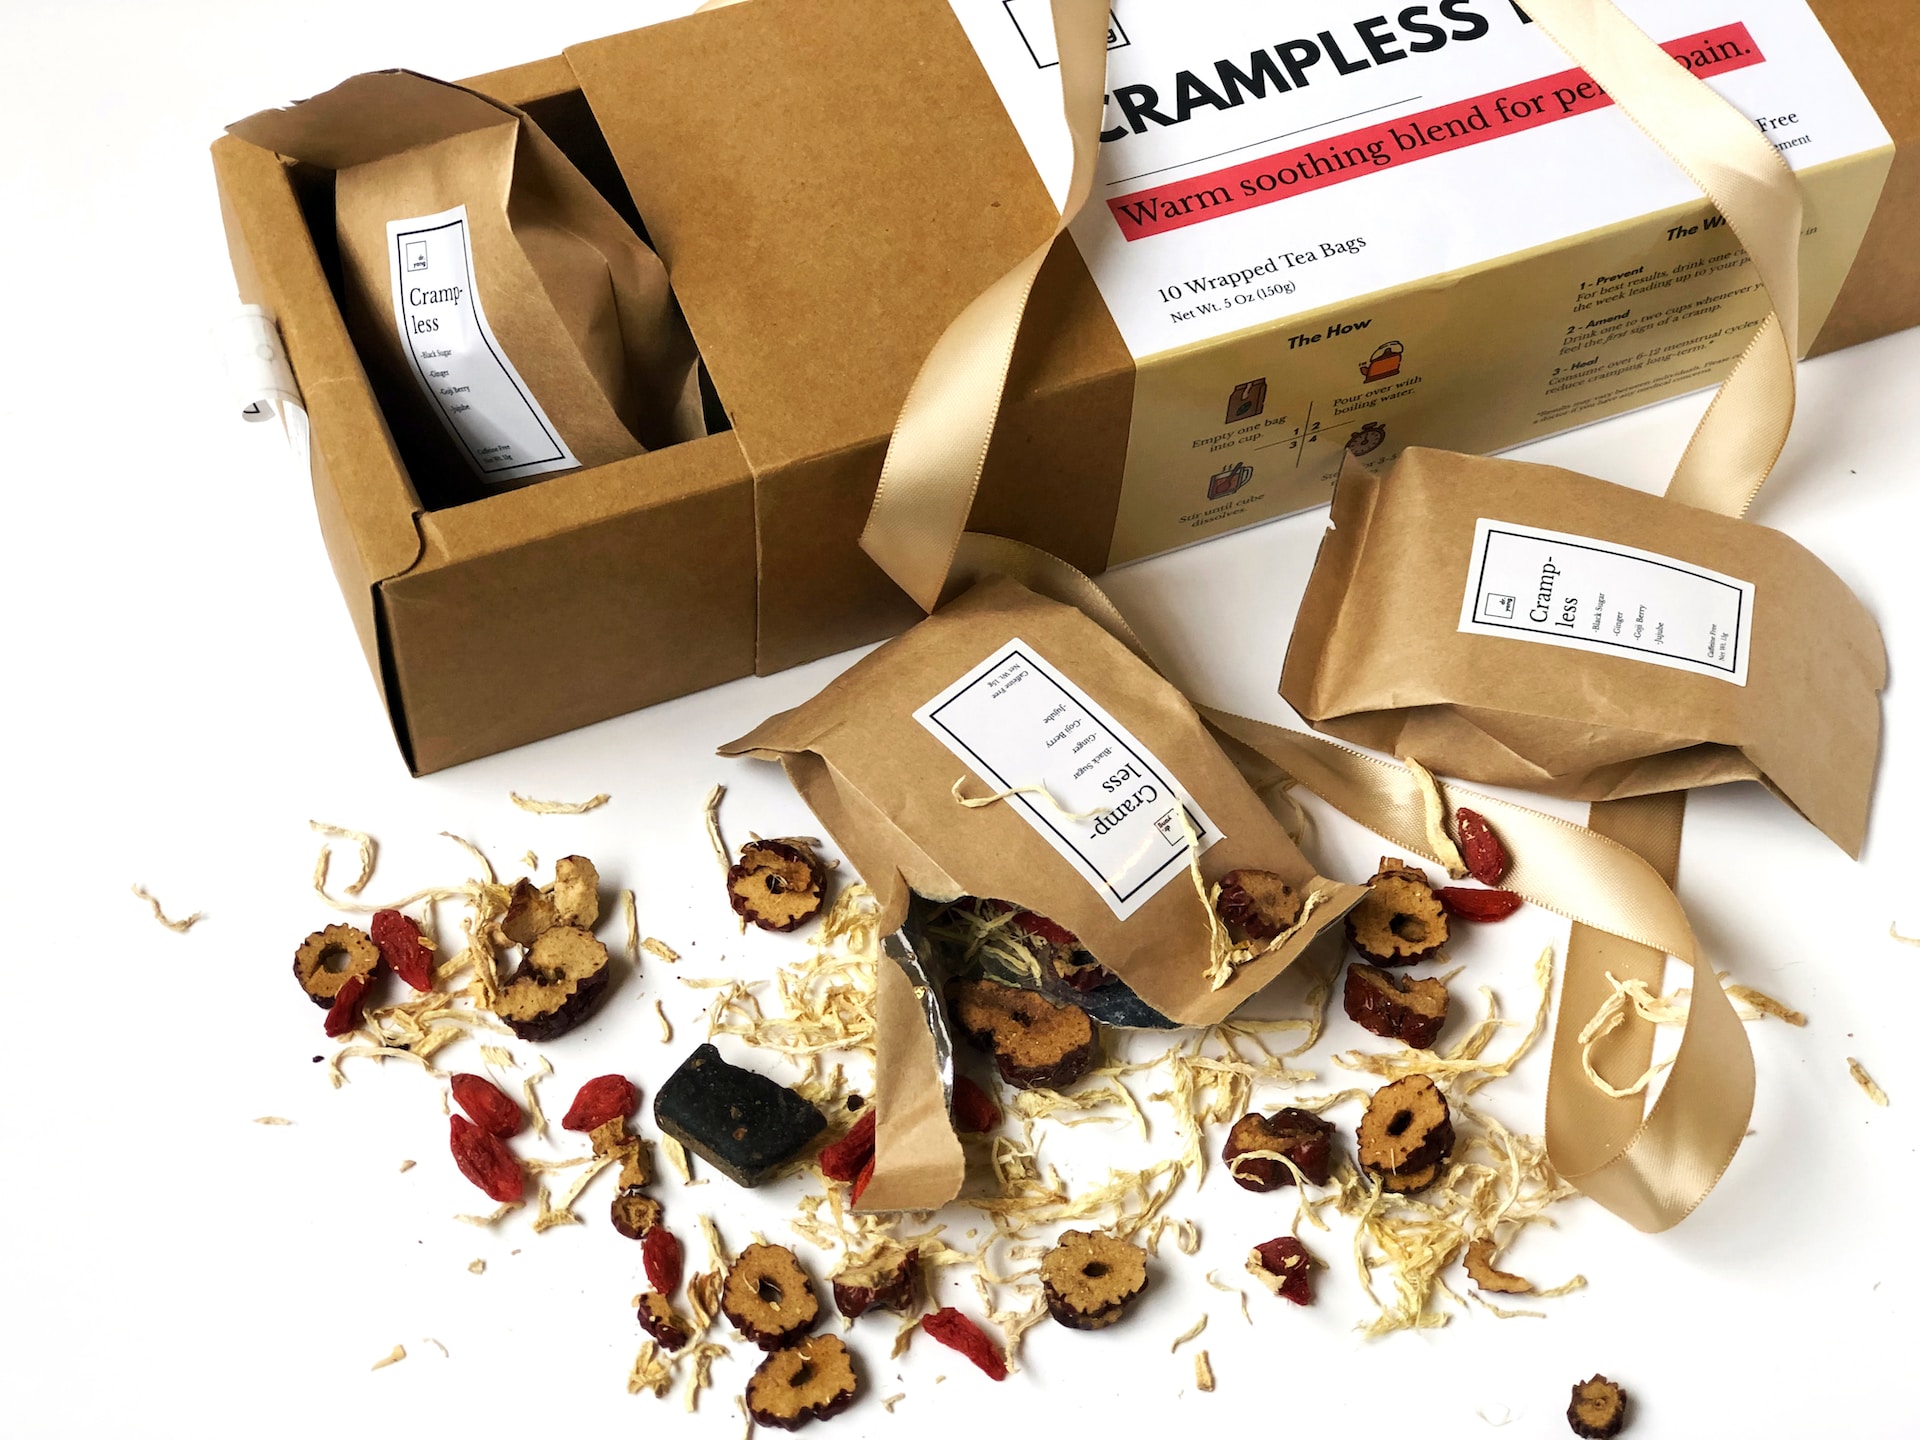 Packaging Pitfalls: Revealing the 5 Most Maddening Things About Food Packaging